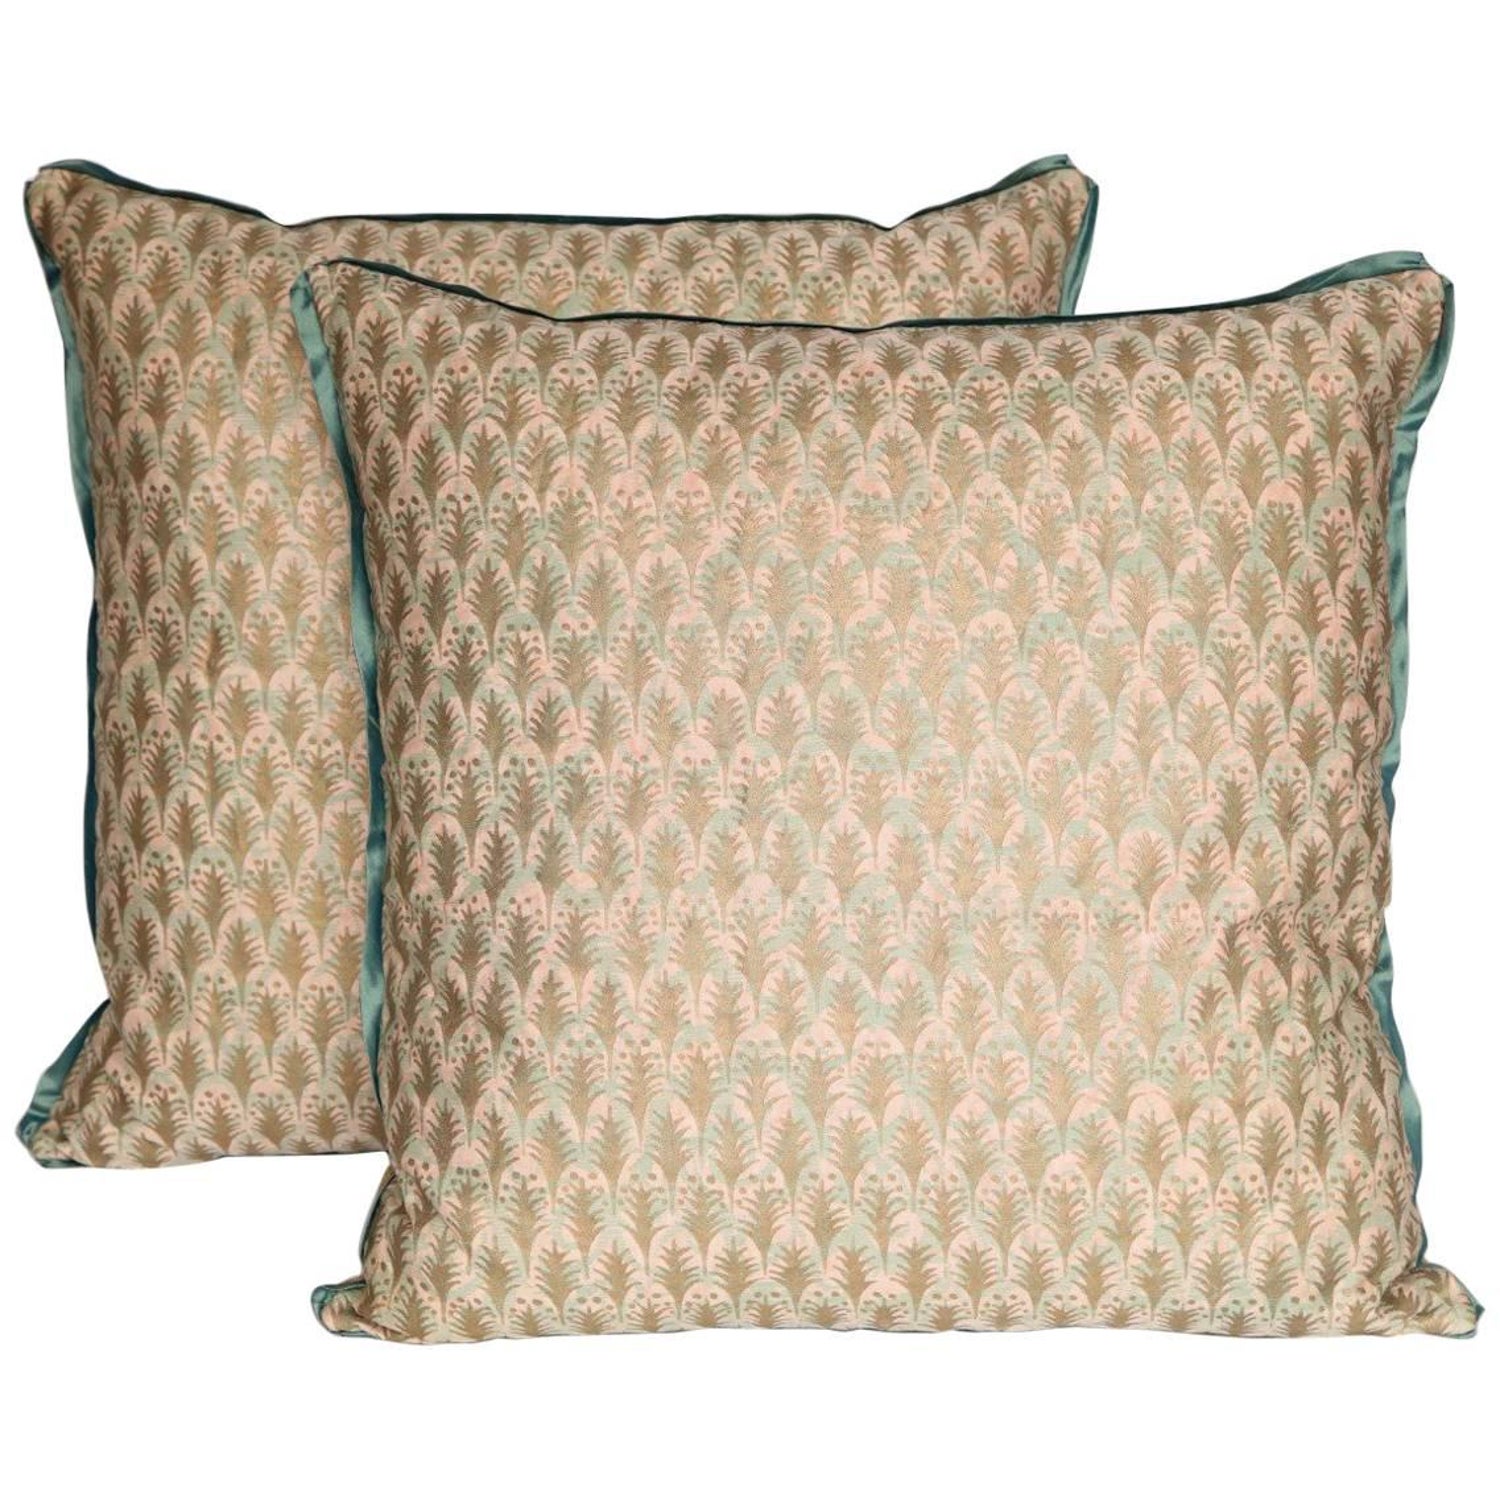 Pair of Fortuny Fabric Cushions in the Puimette Pattern, New and in Stock  For Sale at 1stDibs